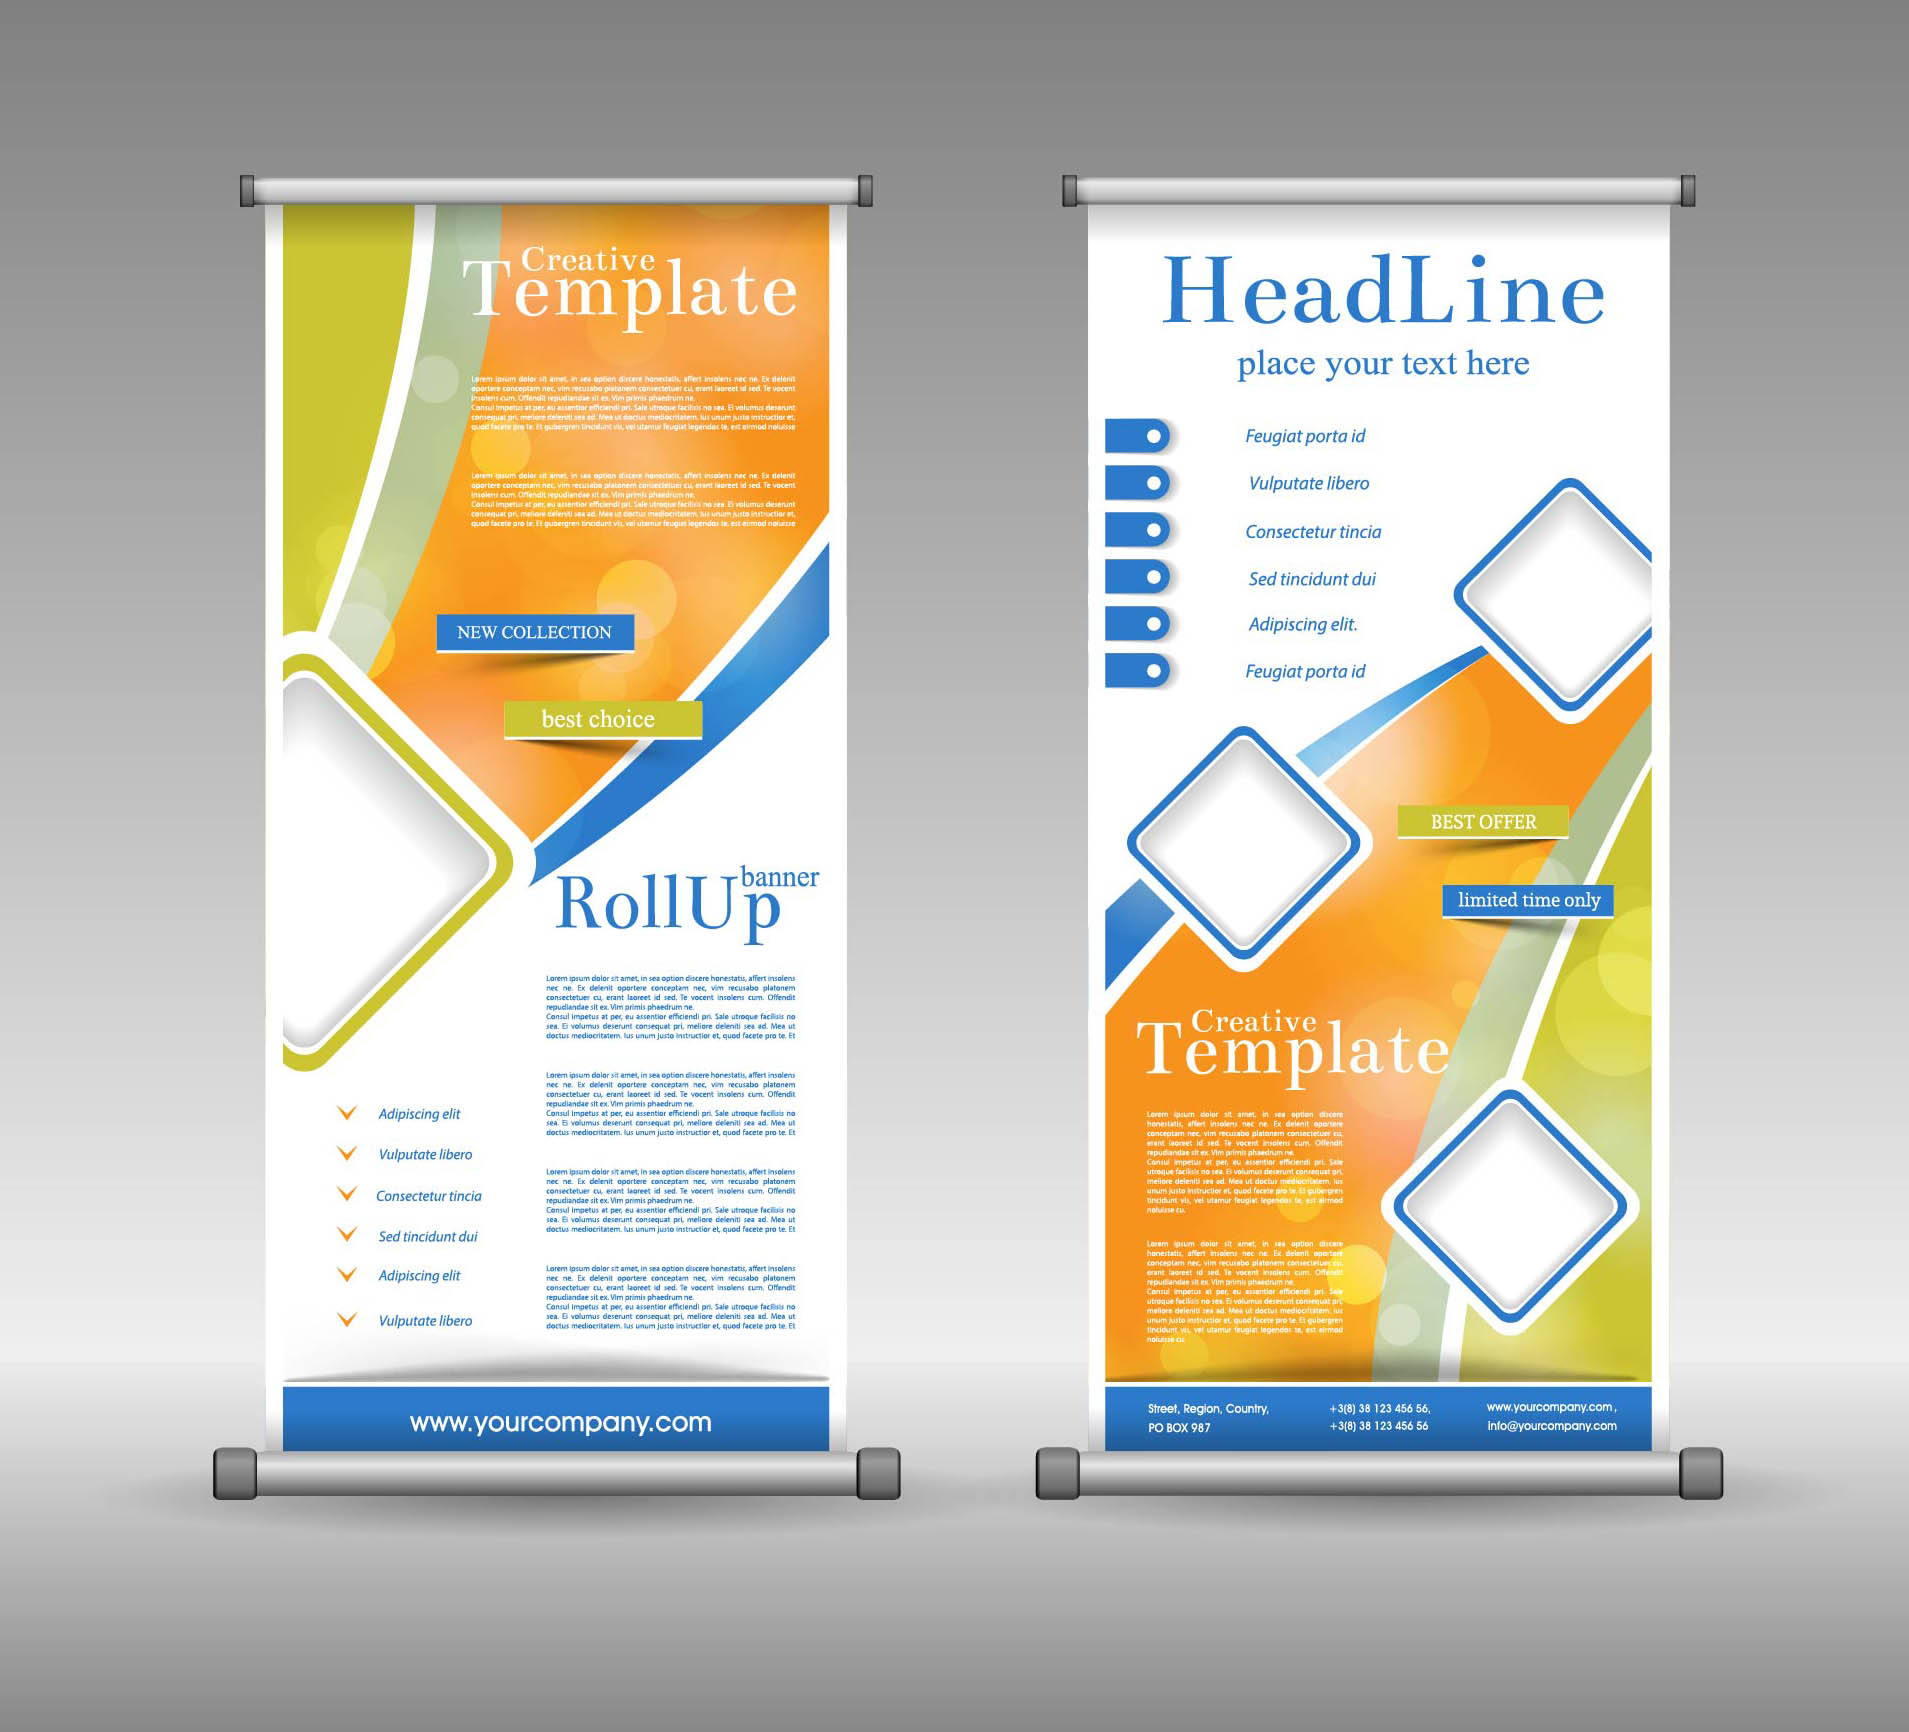 business graphic design display boards